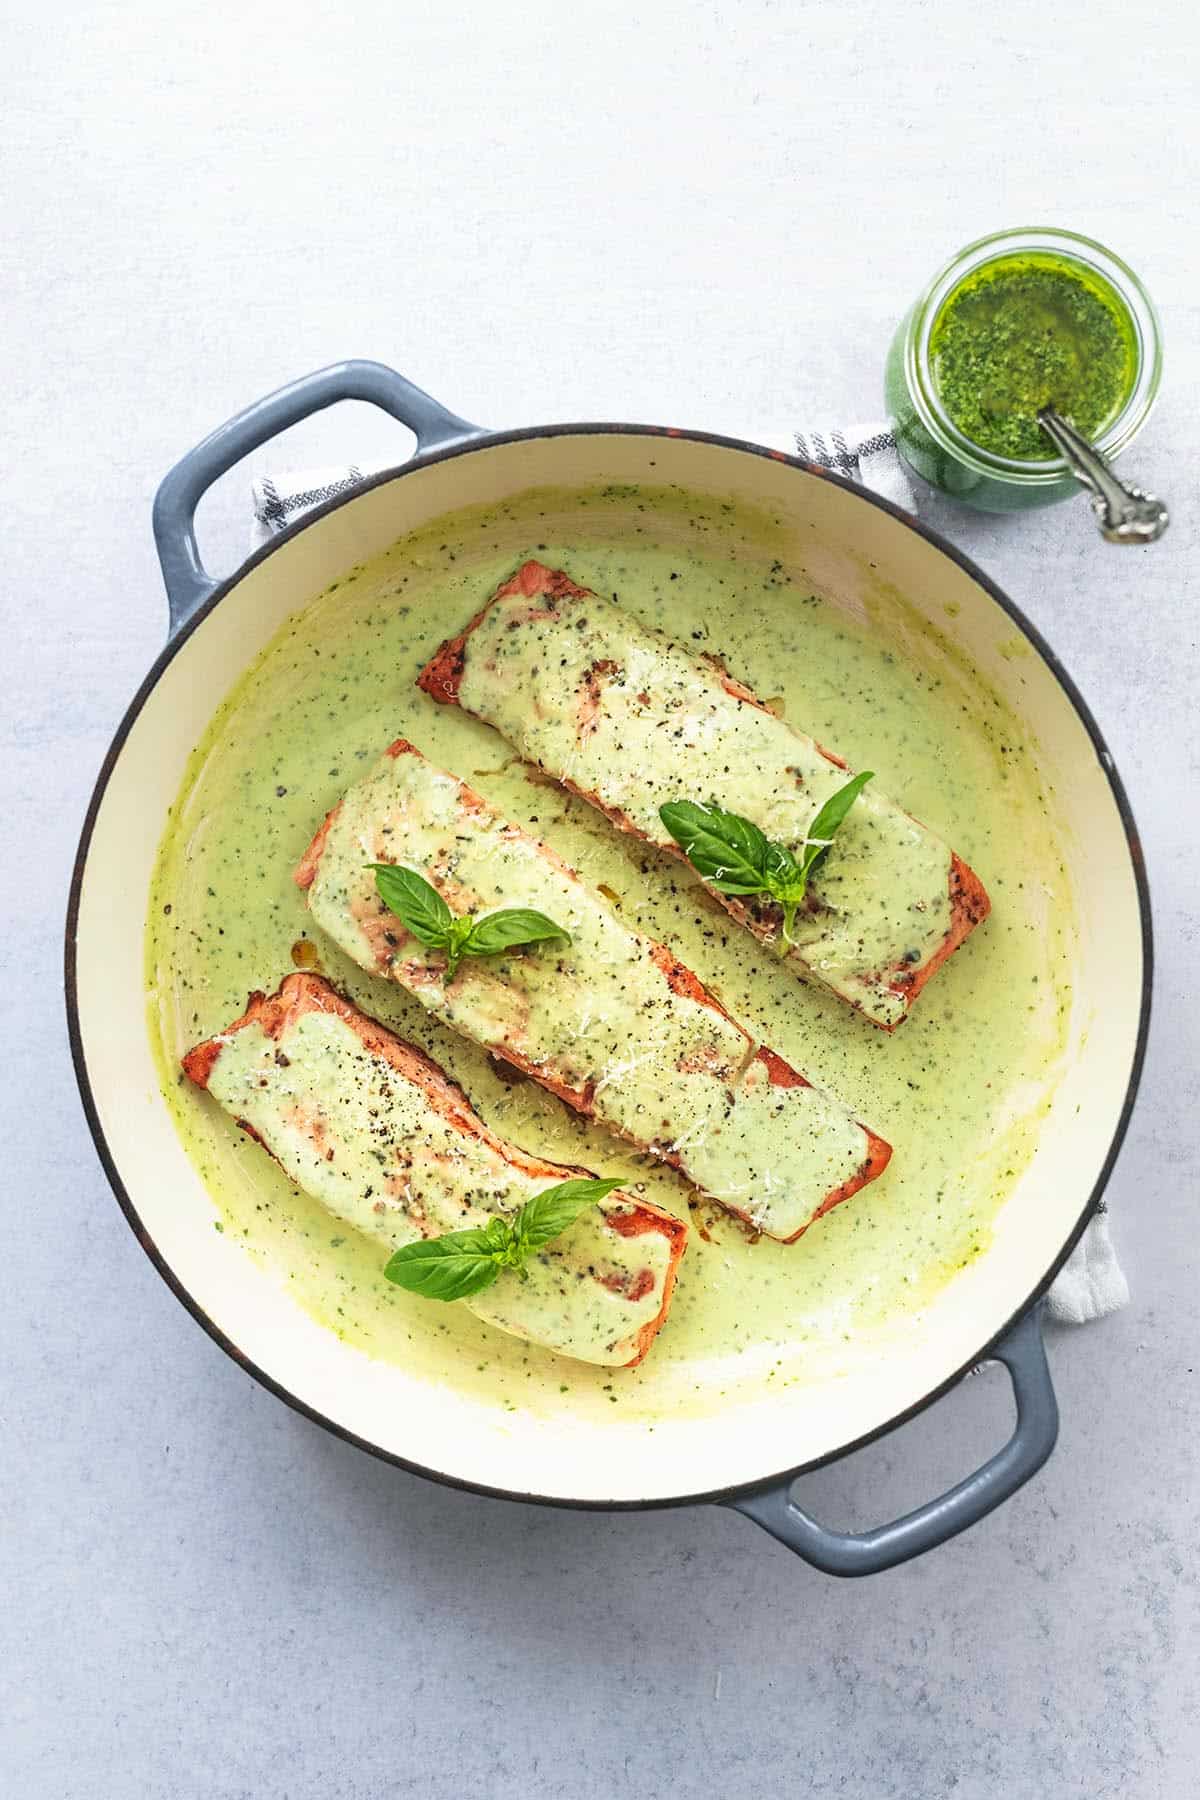 three salmon fillets in skillet with pesto sauce and sauce in jar